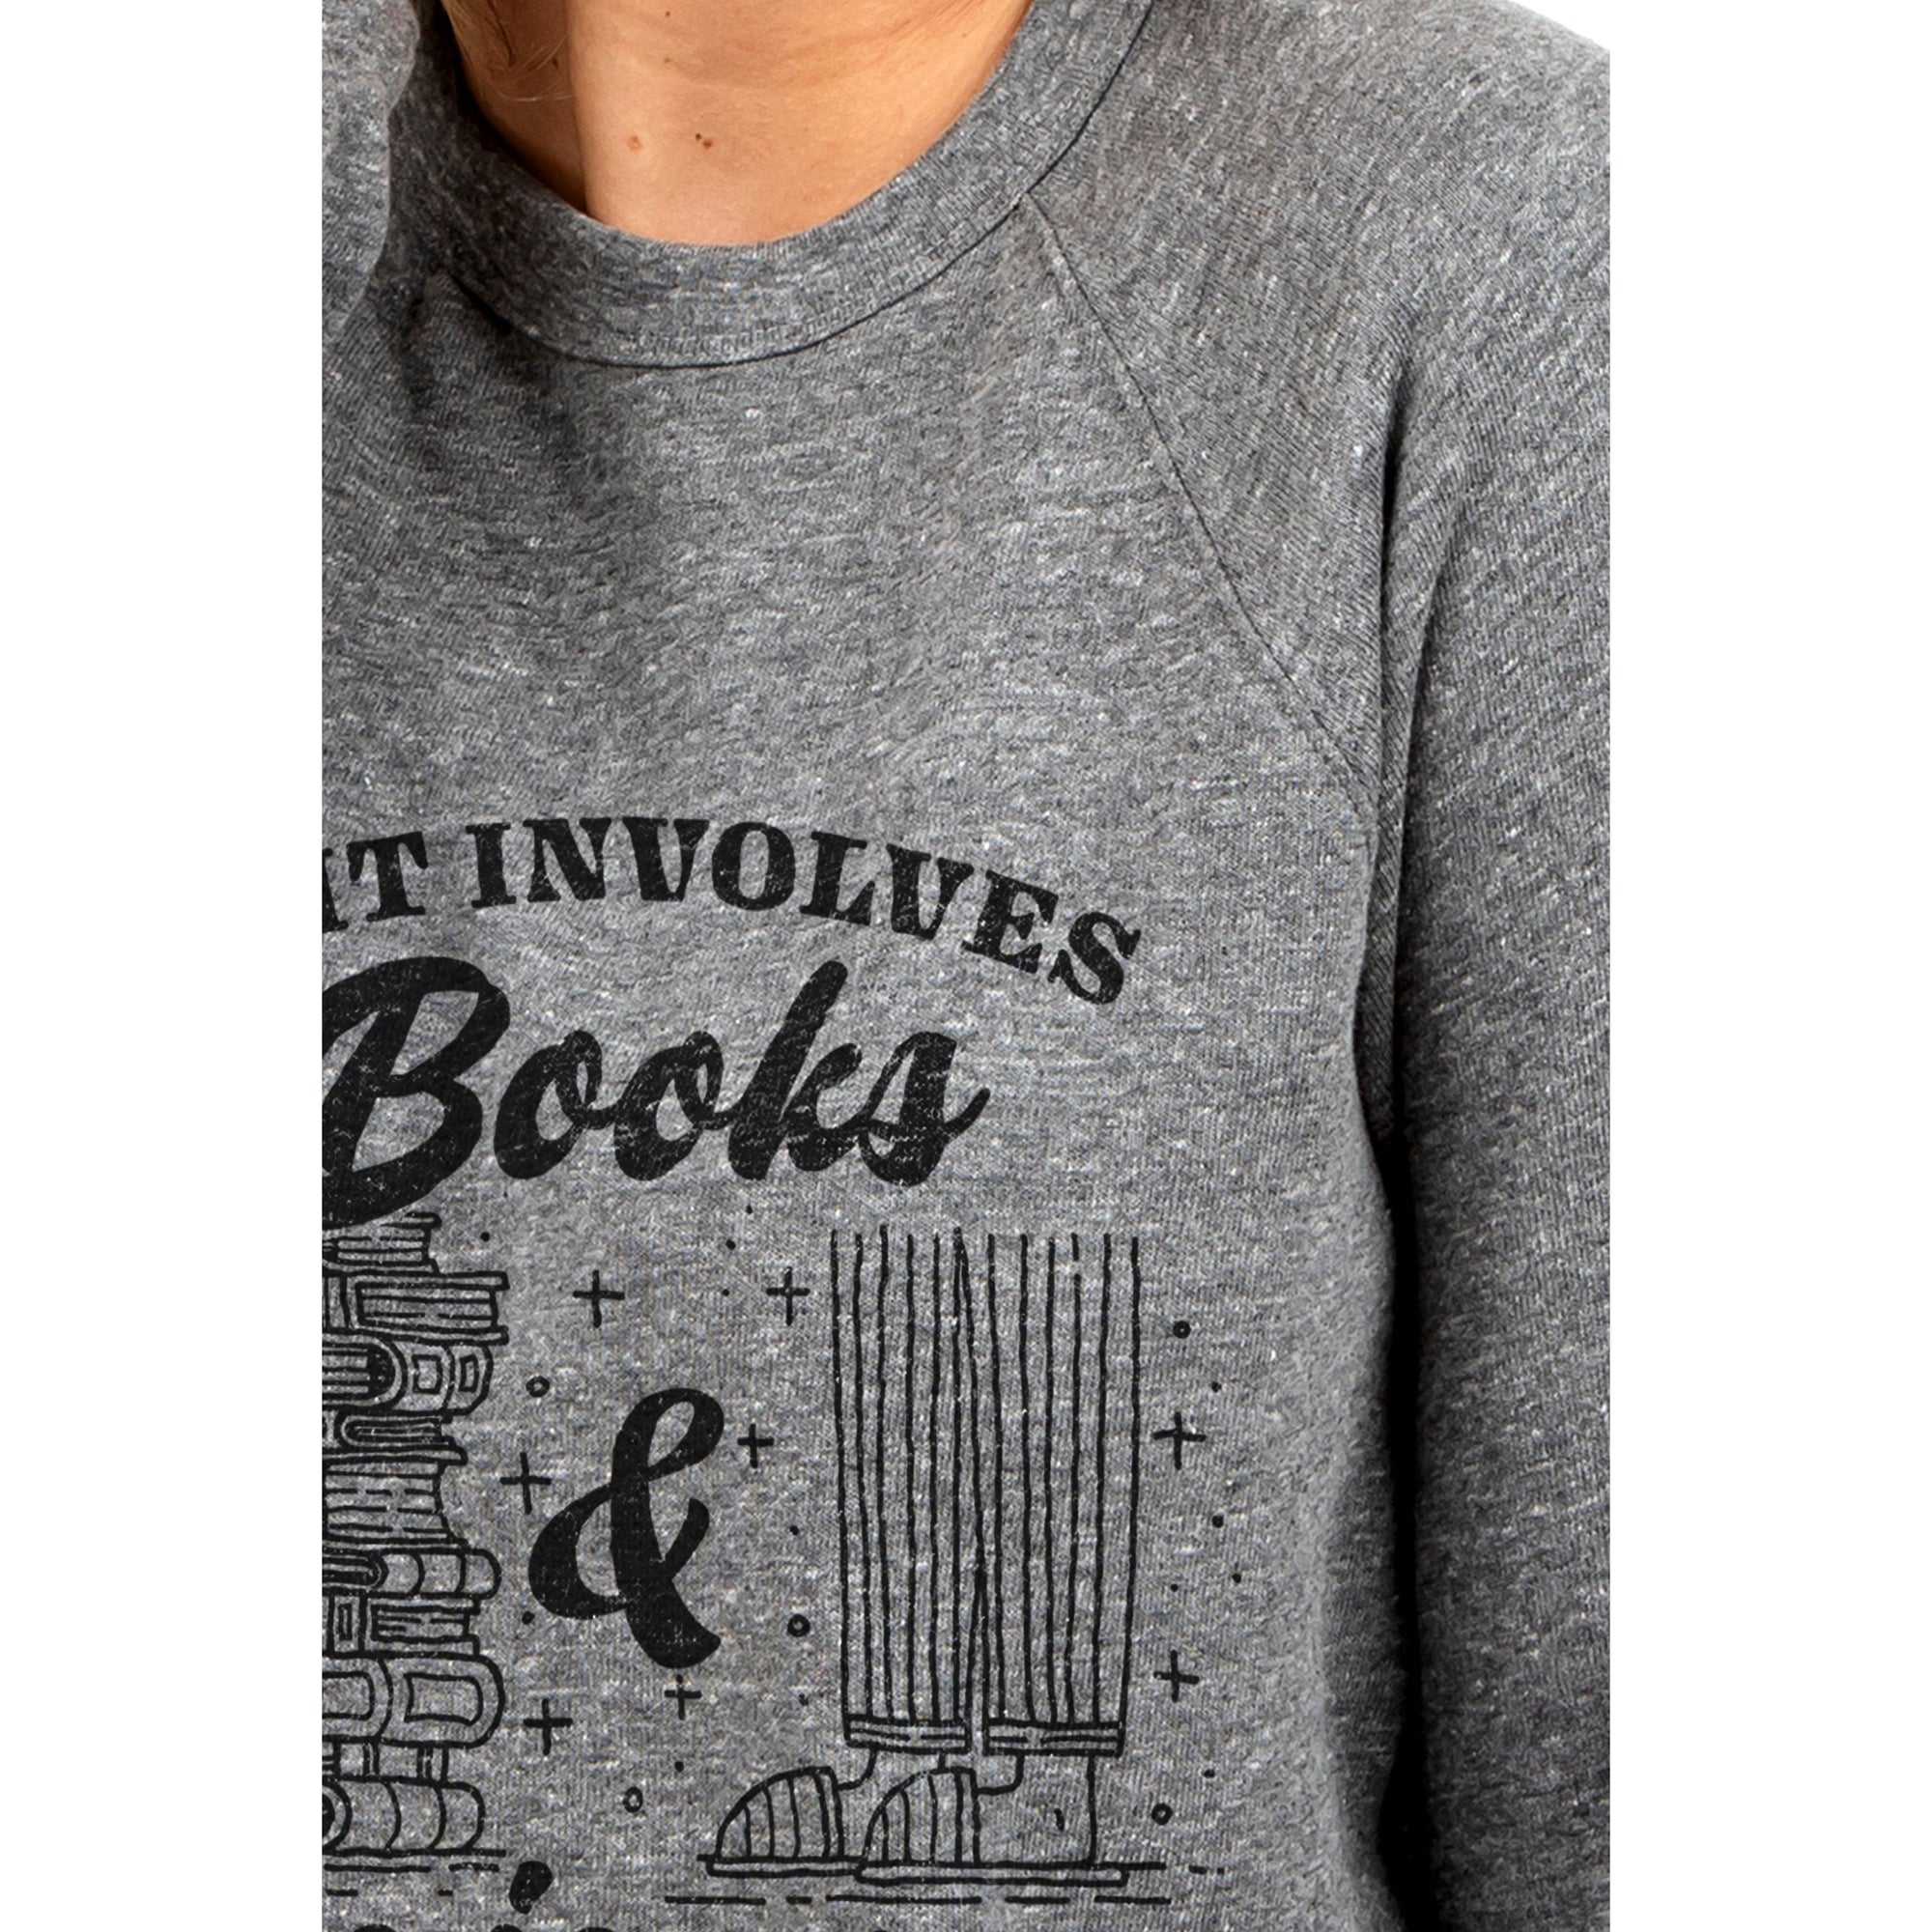 If It Involves Books And Pajamas Counts Me In (Refer To Our Other If It Involves Designs On Our Site) - threadtank | stories you can wear